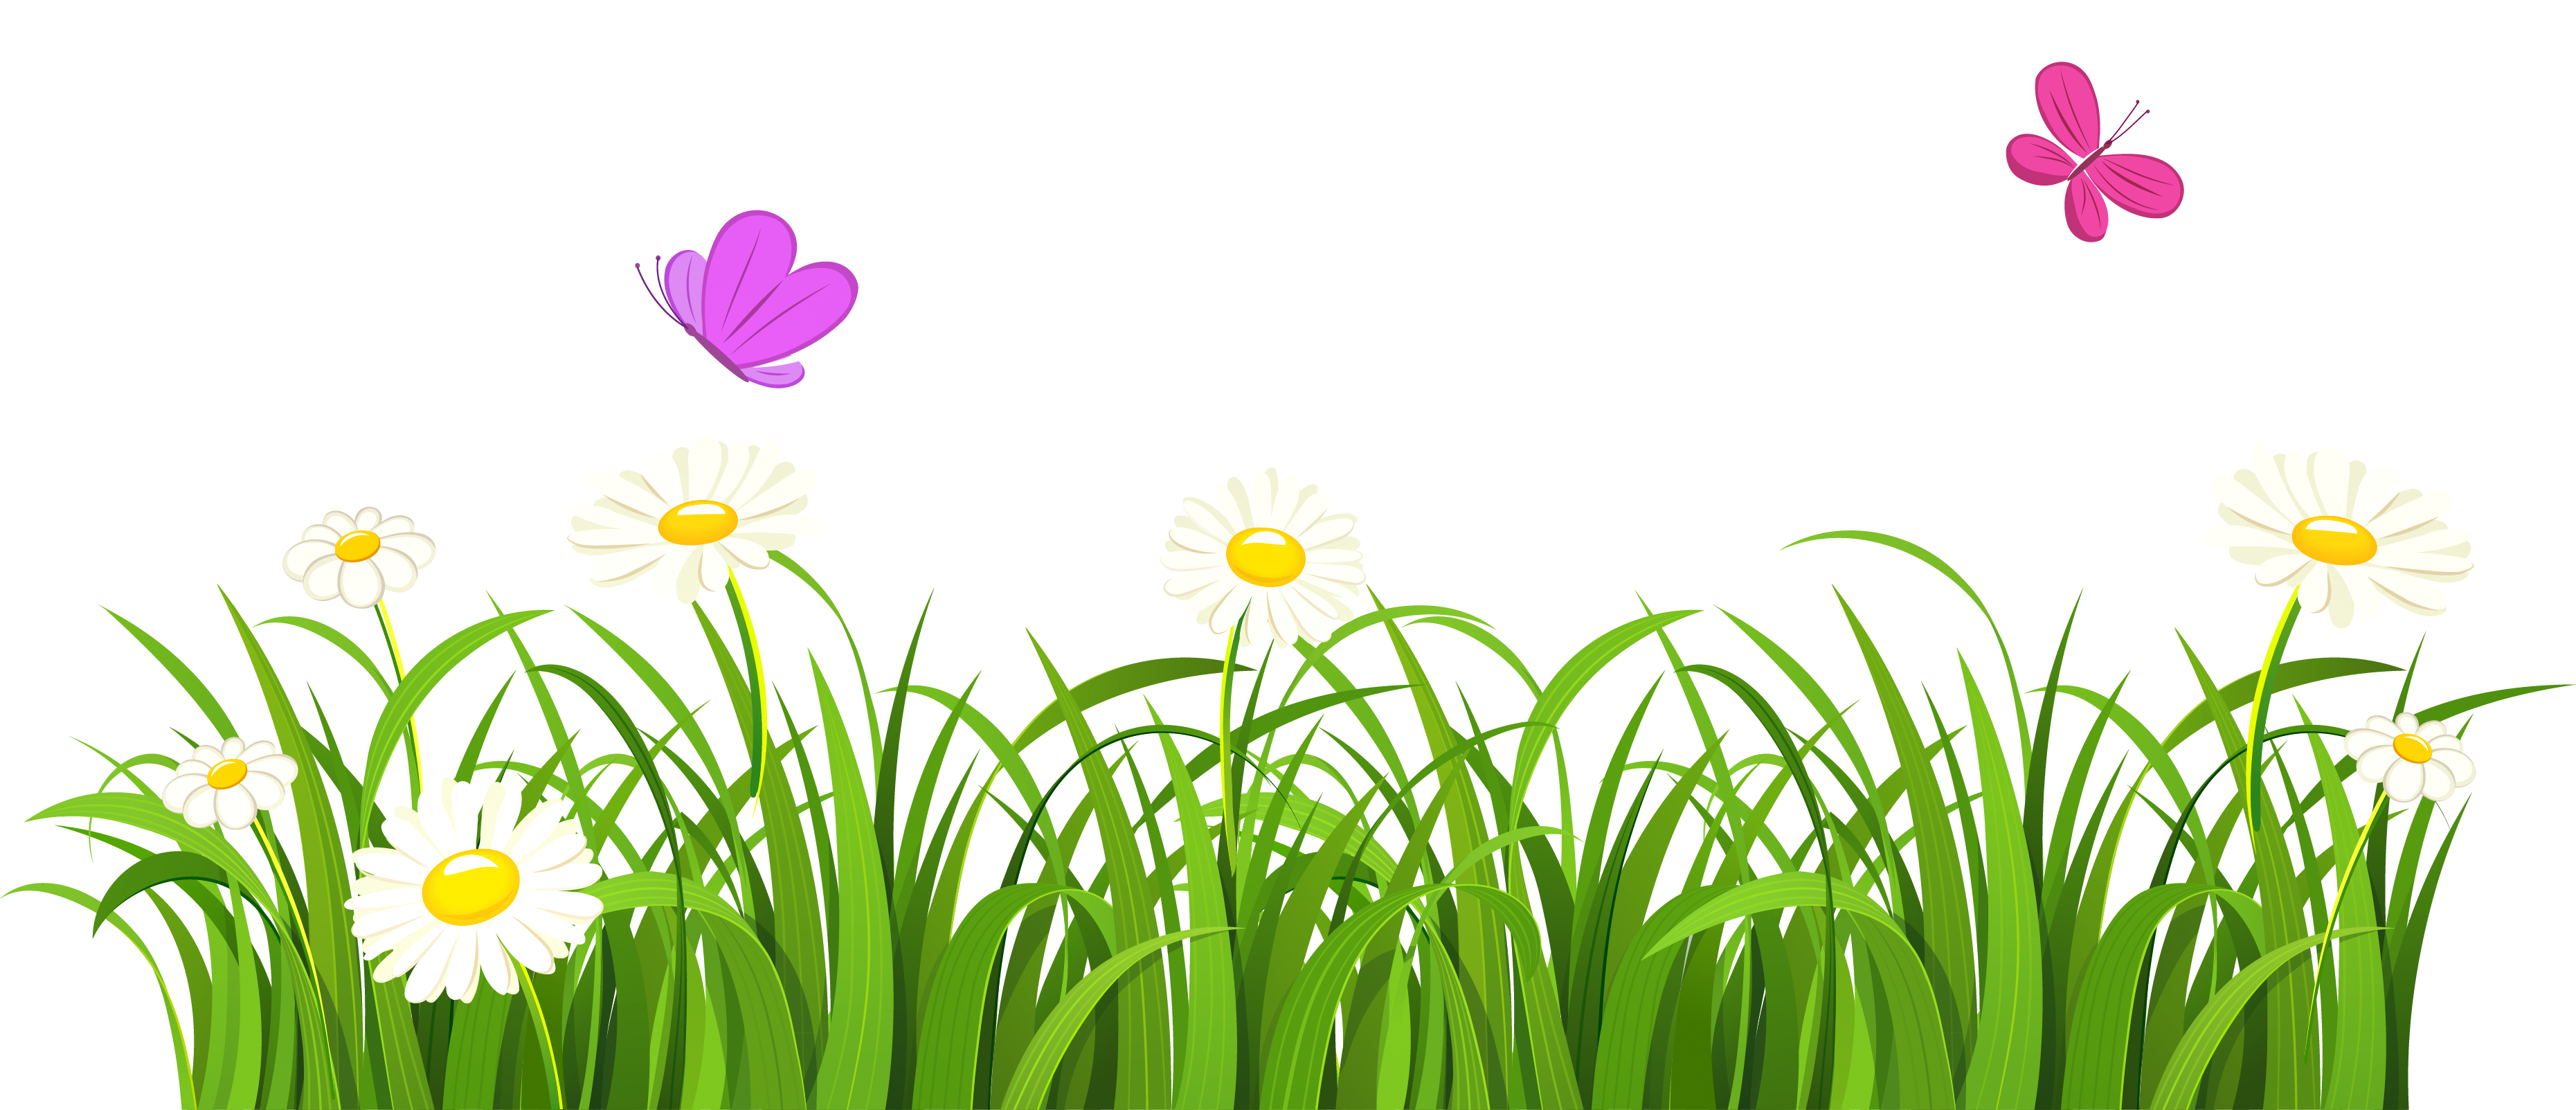 clipart grass png - Clipground